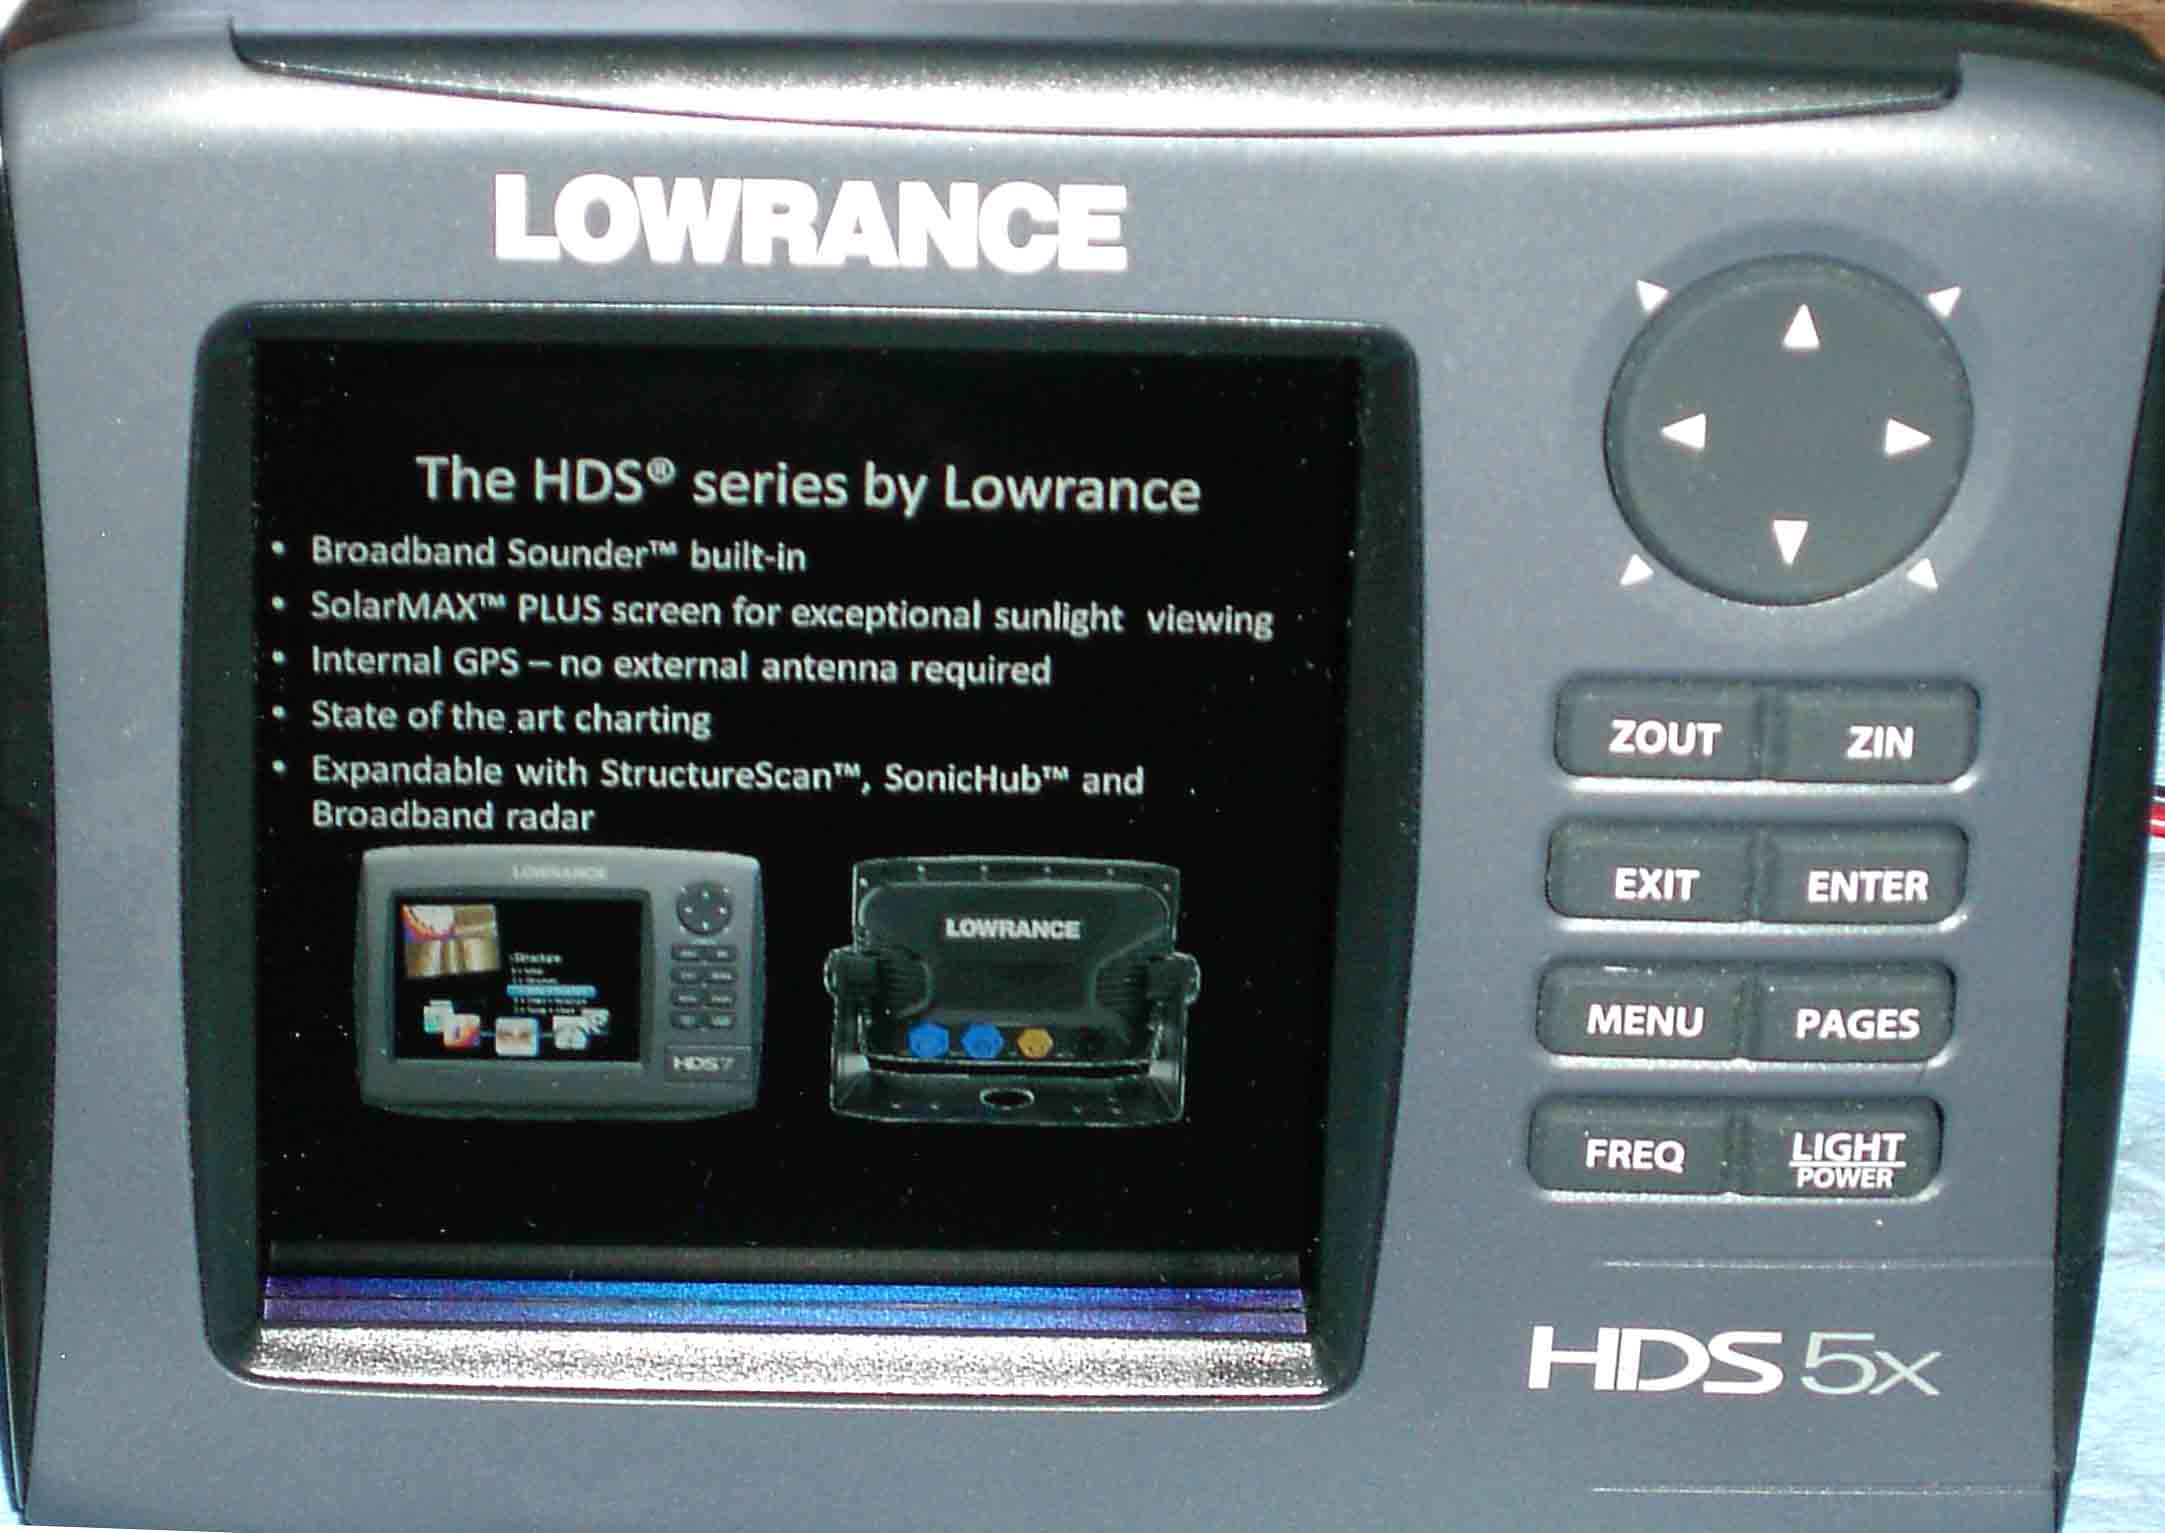 Lowrance HDS-5x Gen2 Depth/Fish Finder - Classified Ads | In-Depth Outdoors